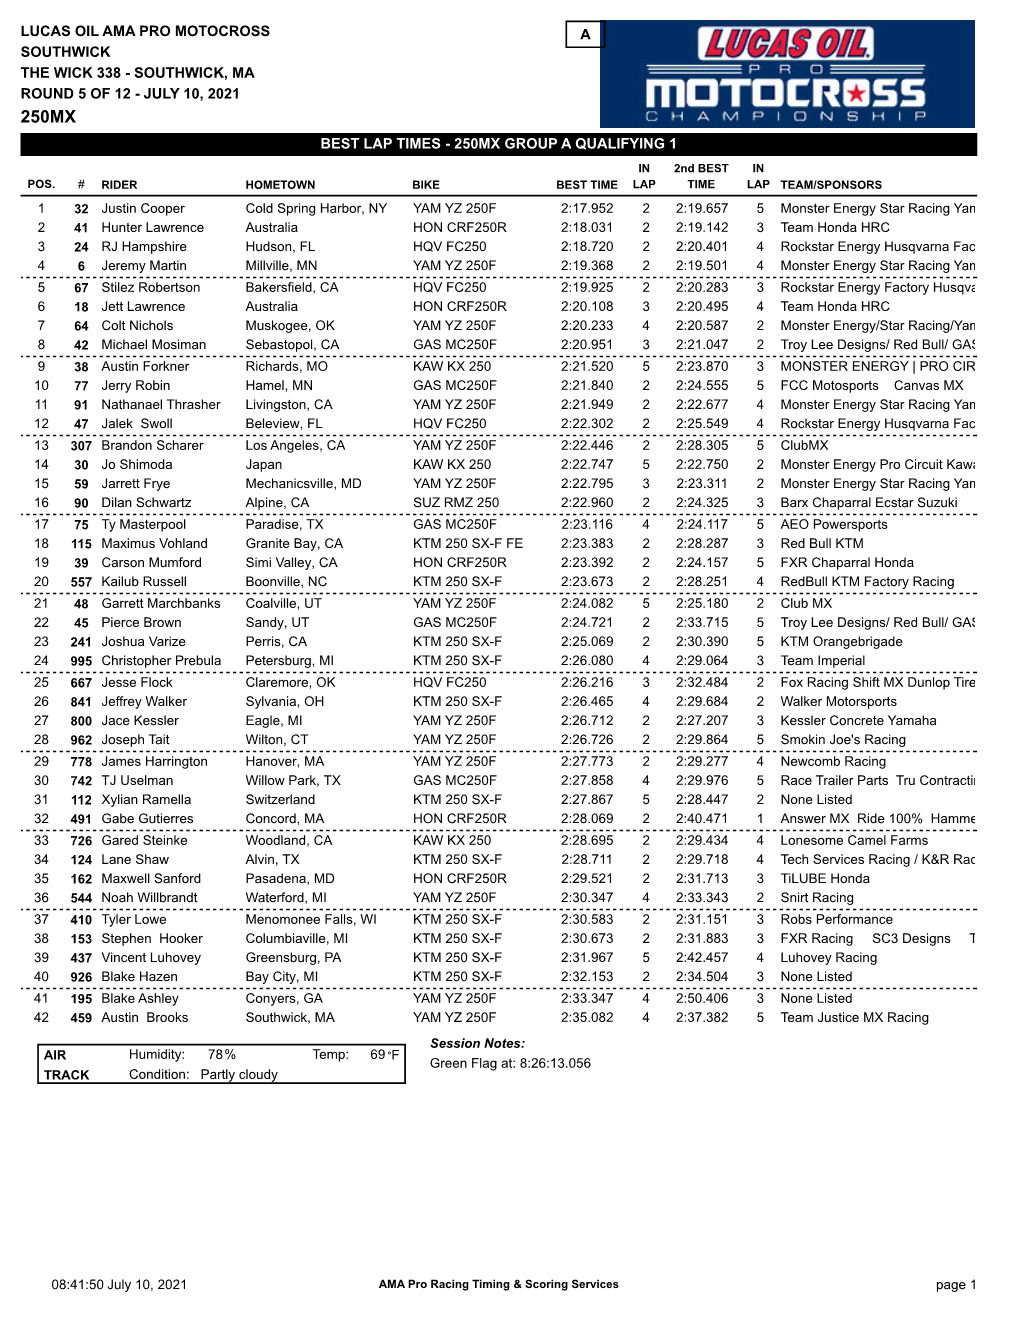 BEST LAP TIMES - 250MX GROUP a QUALIFYING 1 in 2Nd BEST in POS